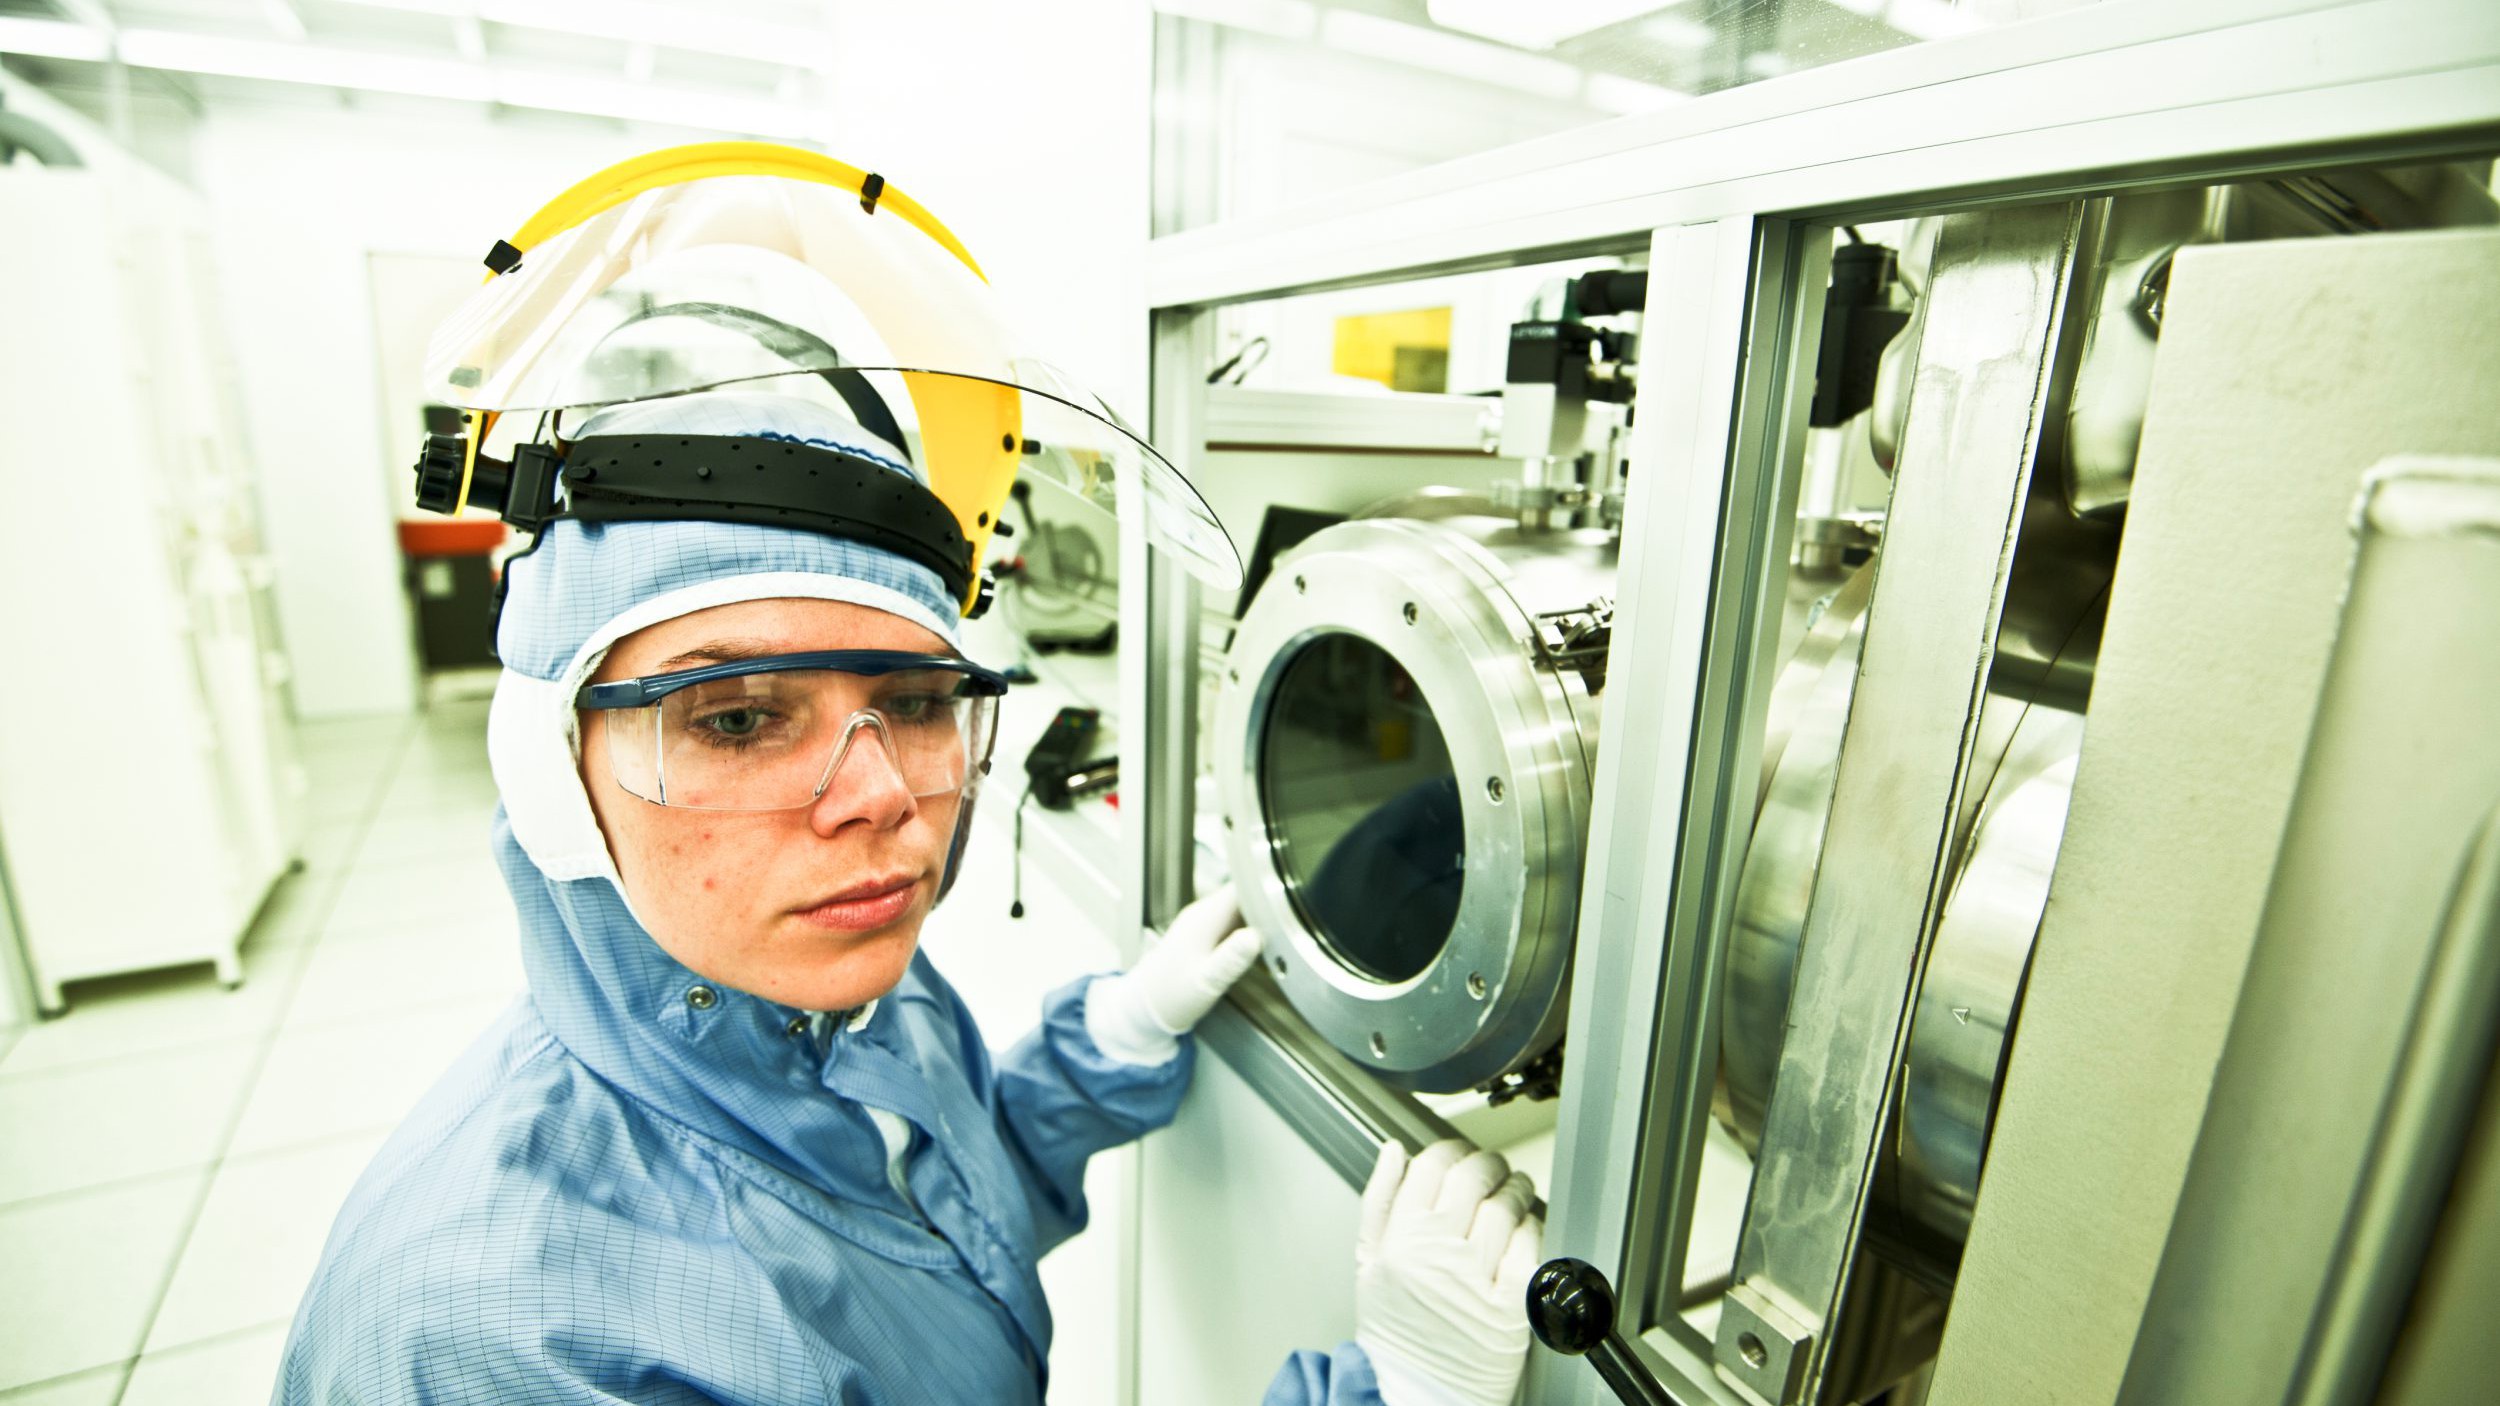 medical device regulation being tested by Woman Scientist Pose in Cleanroom/Laboratory